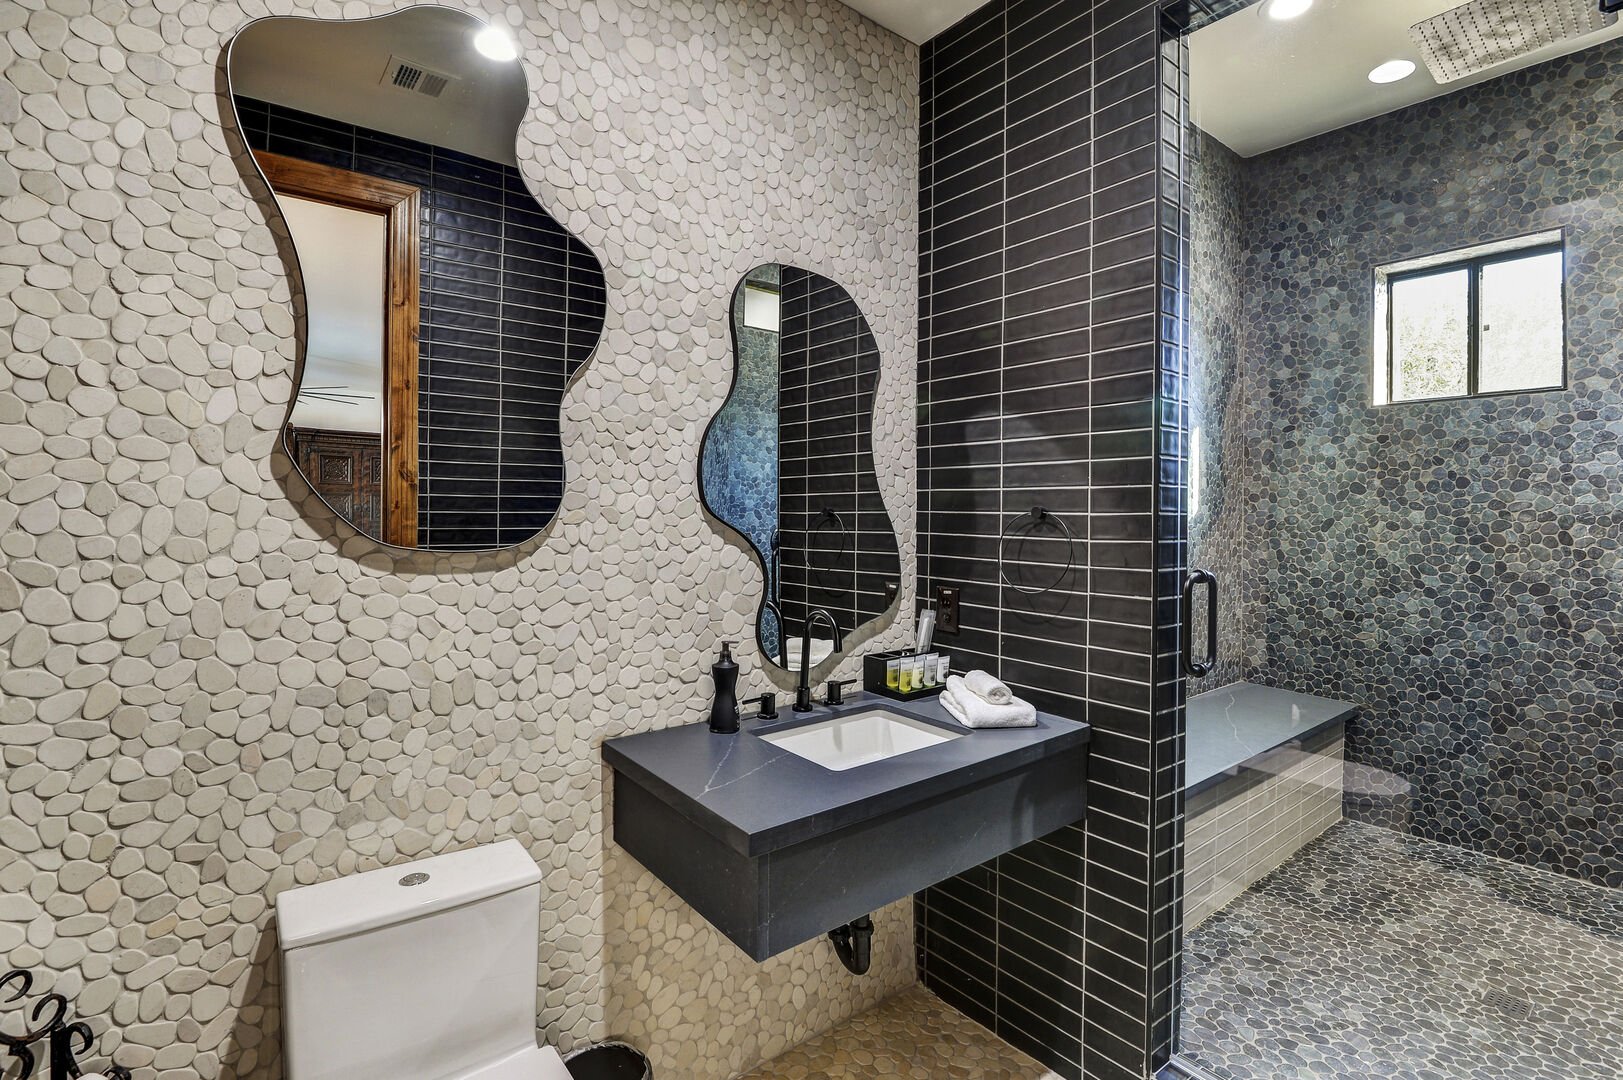 Indulge in convenience and style with the game room bathroom at Casa Palacio, offering a view into the standing shower.